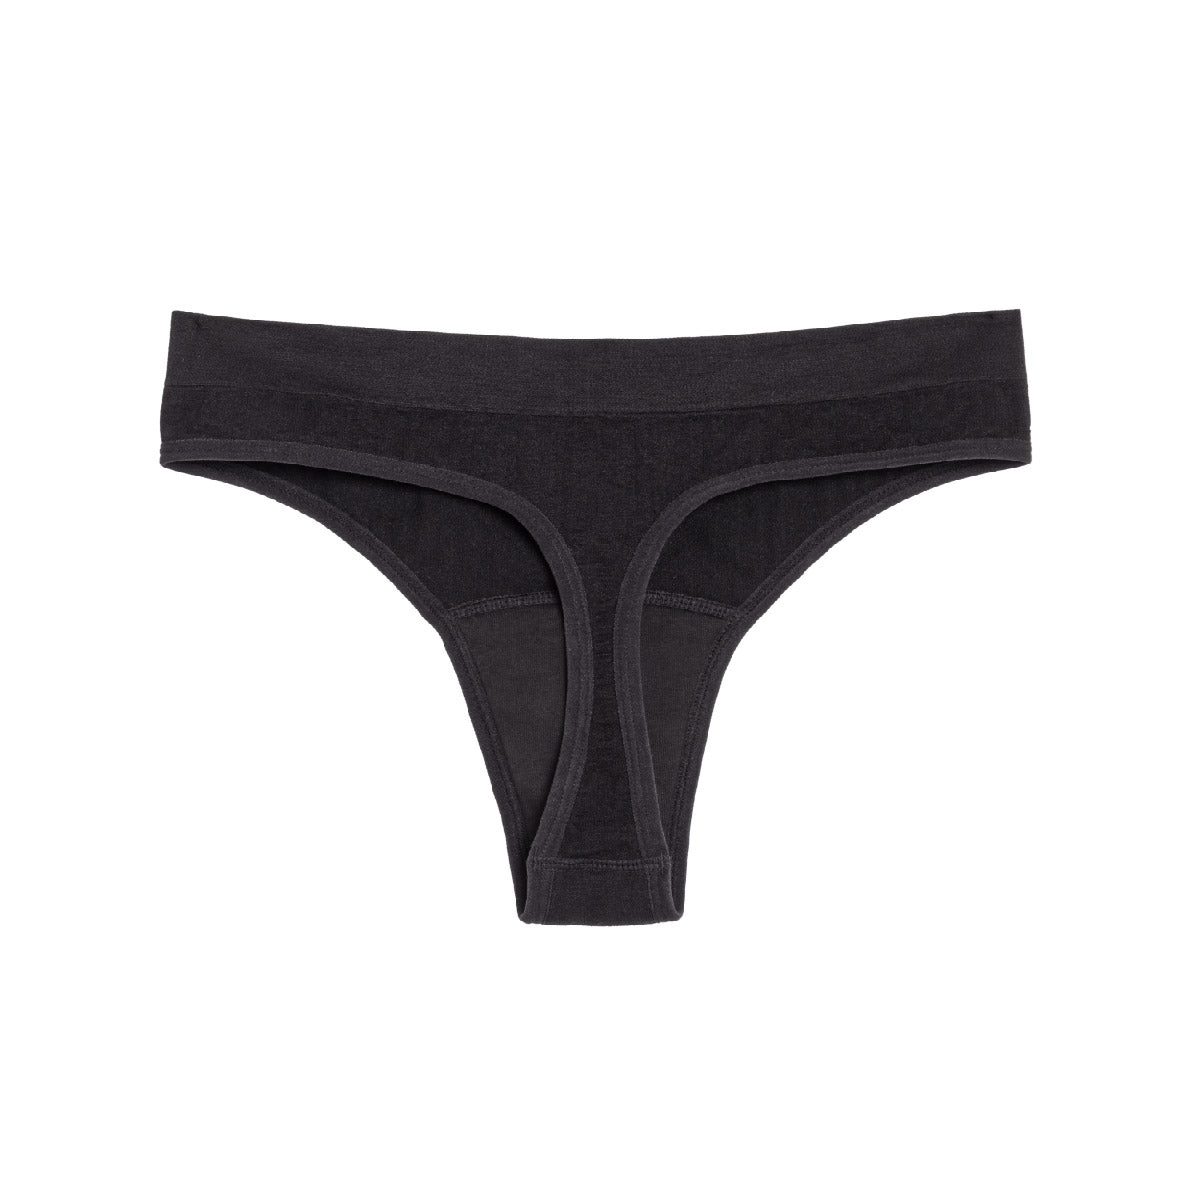 The Thong Period. in Sporty Stretch For Light Flows – The Period